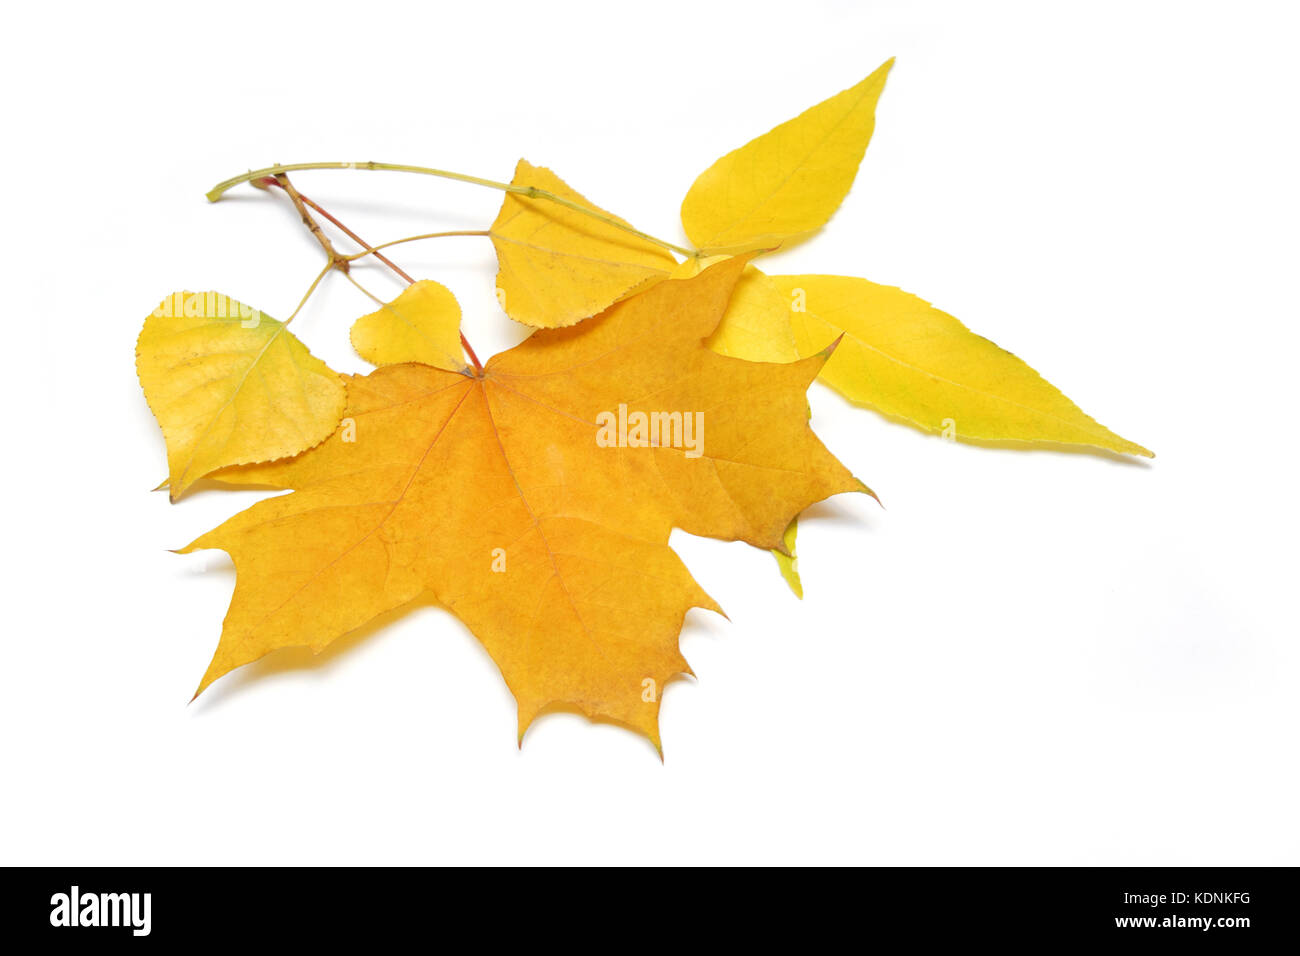 Falling birch, maple and ash leaves on the white background. Stock Photo